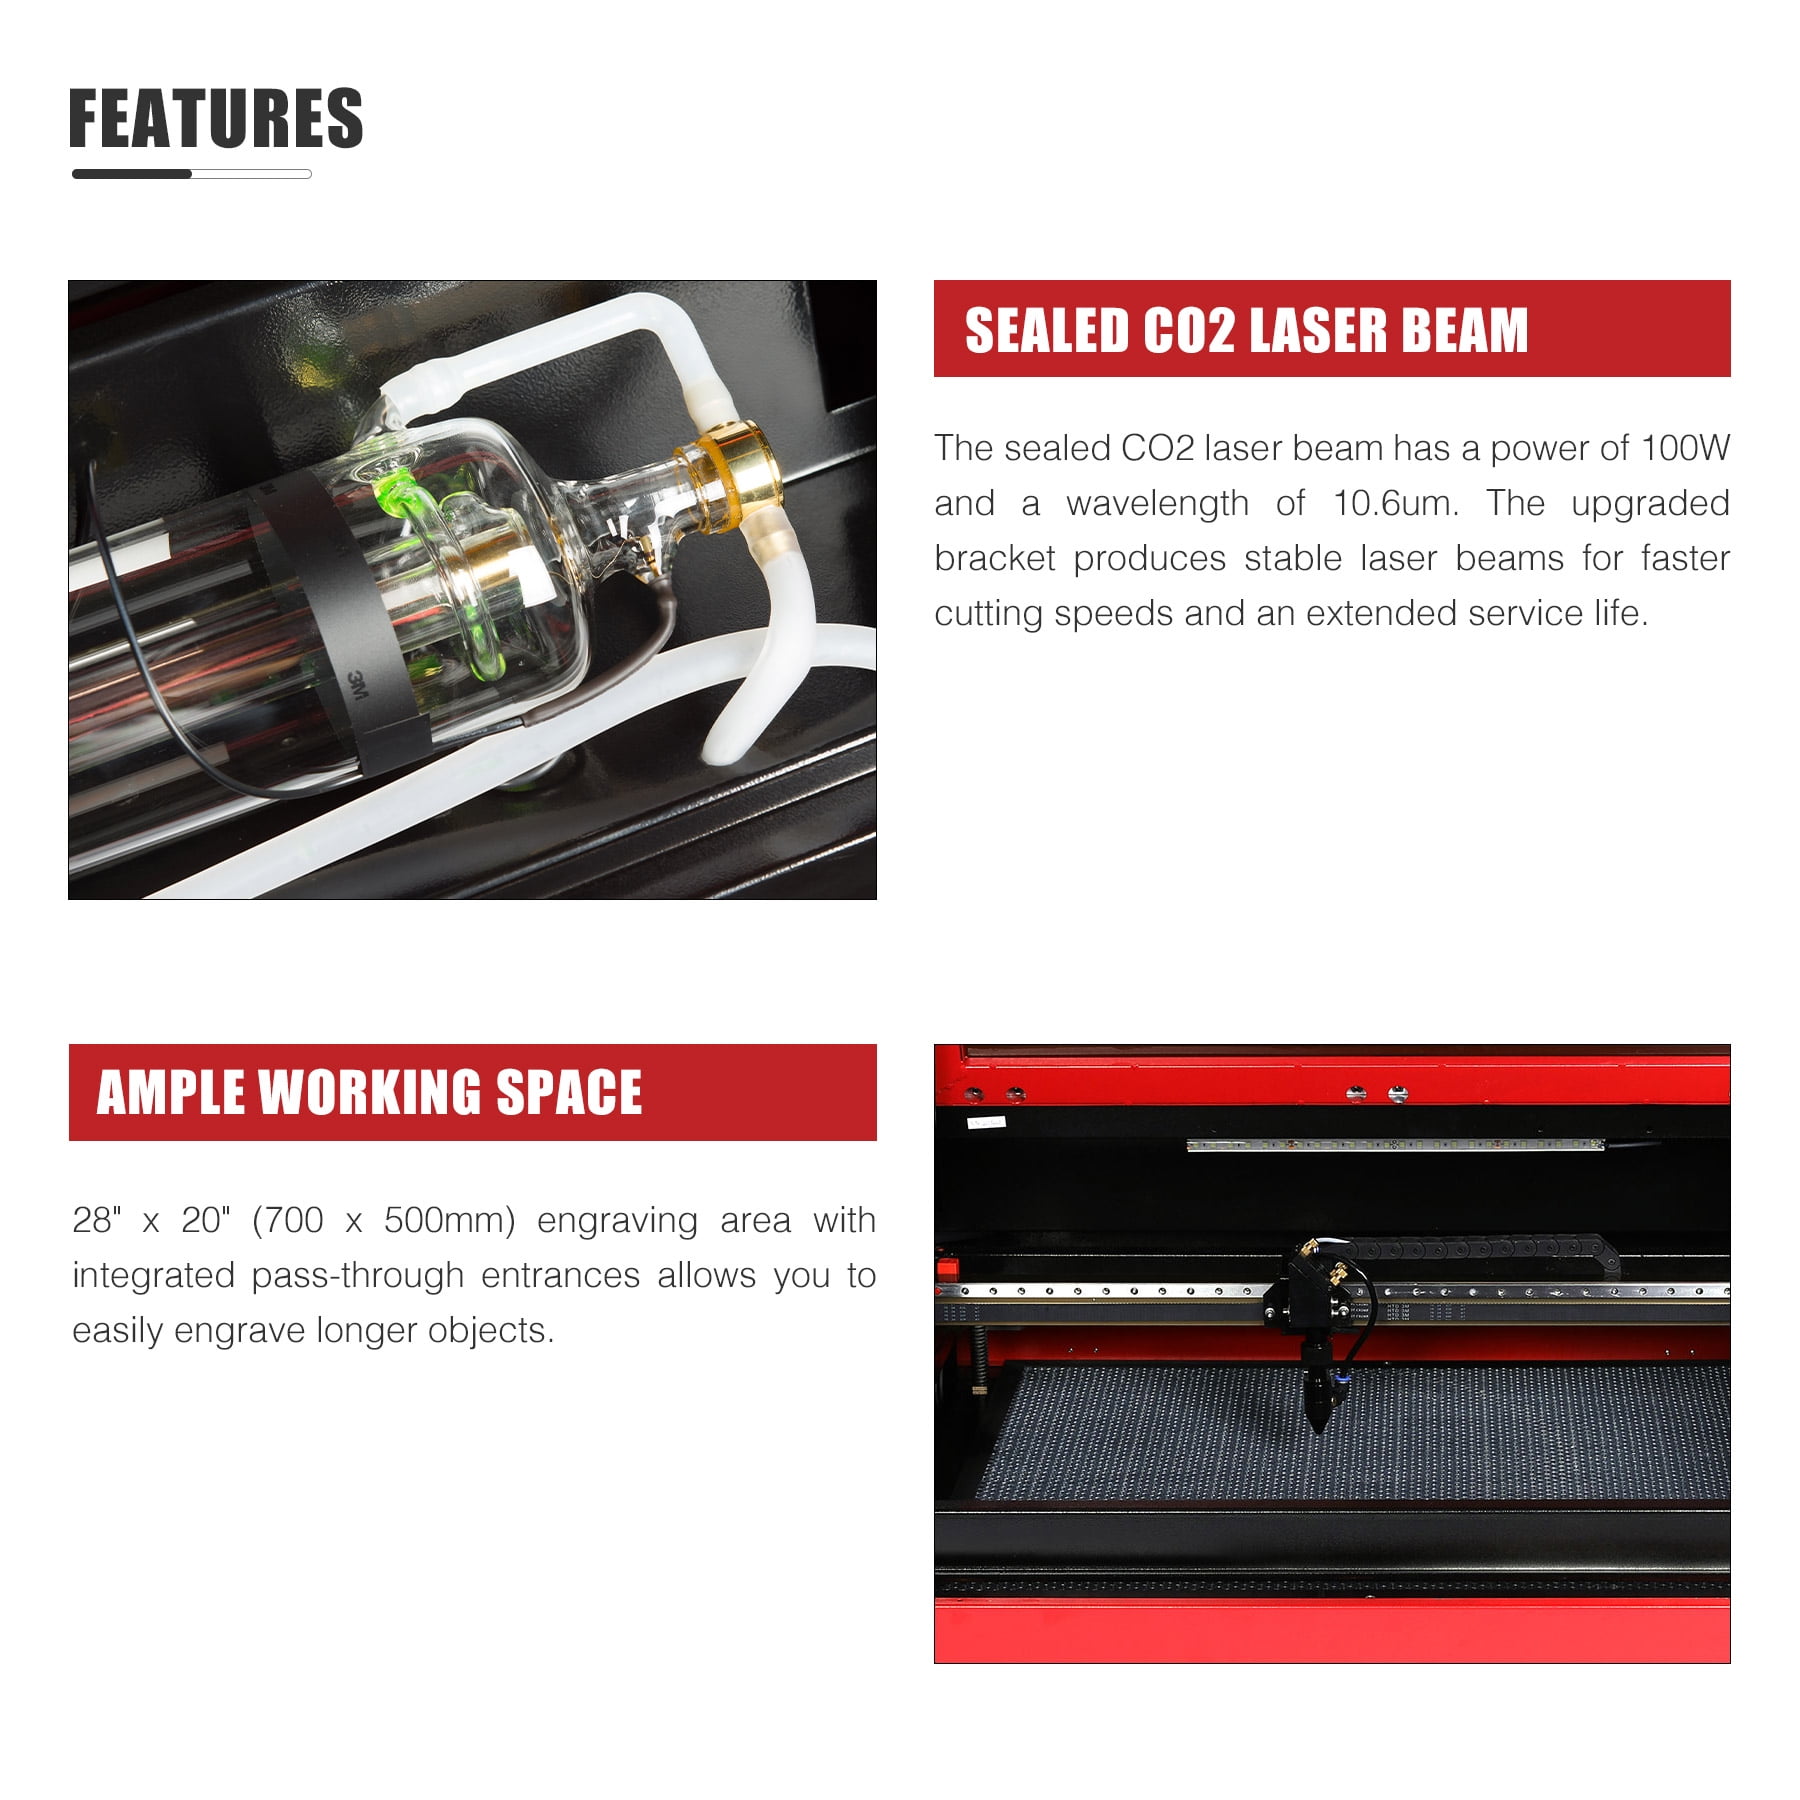 100W CO2 Laser Engraver - Pay as Low as $117/mo. - OMTech – OMTech Laser